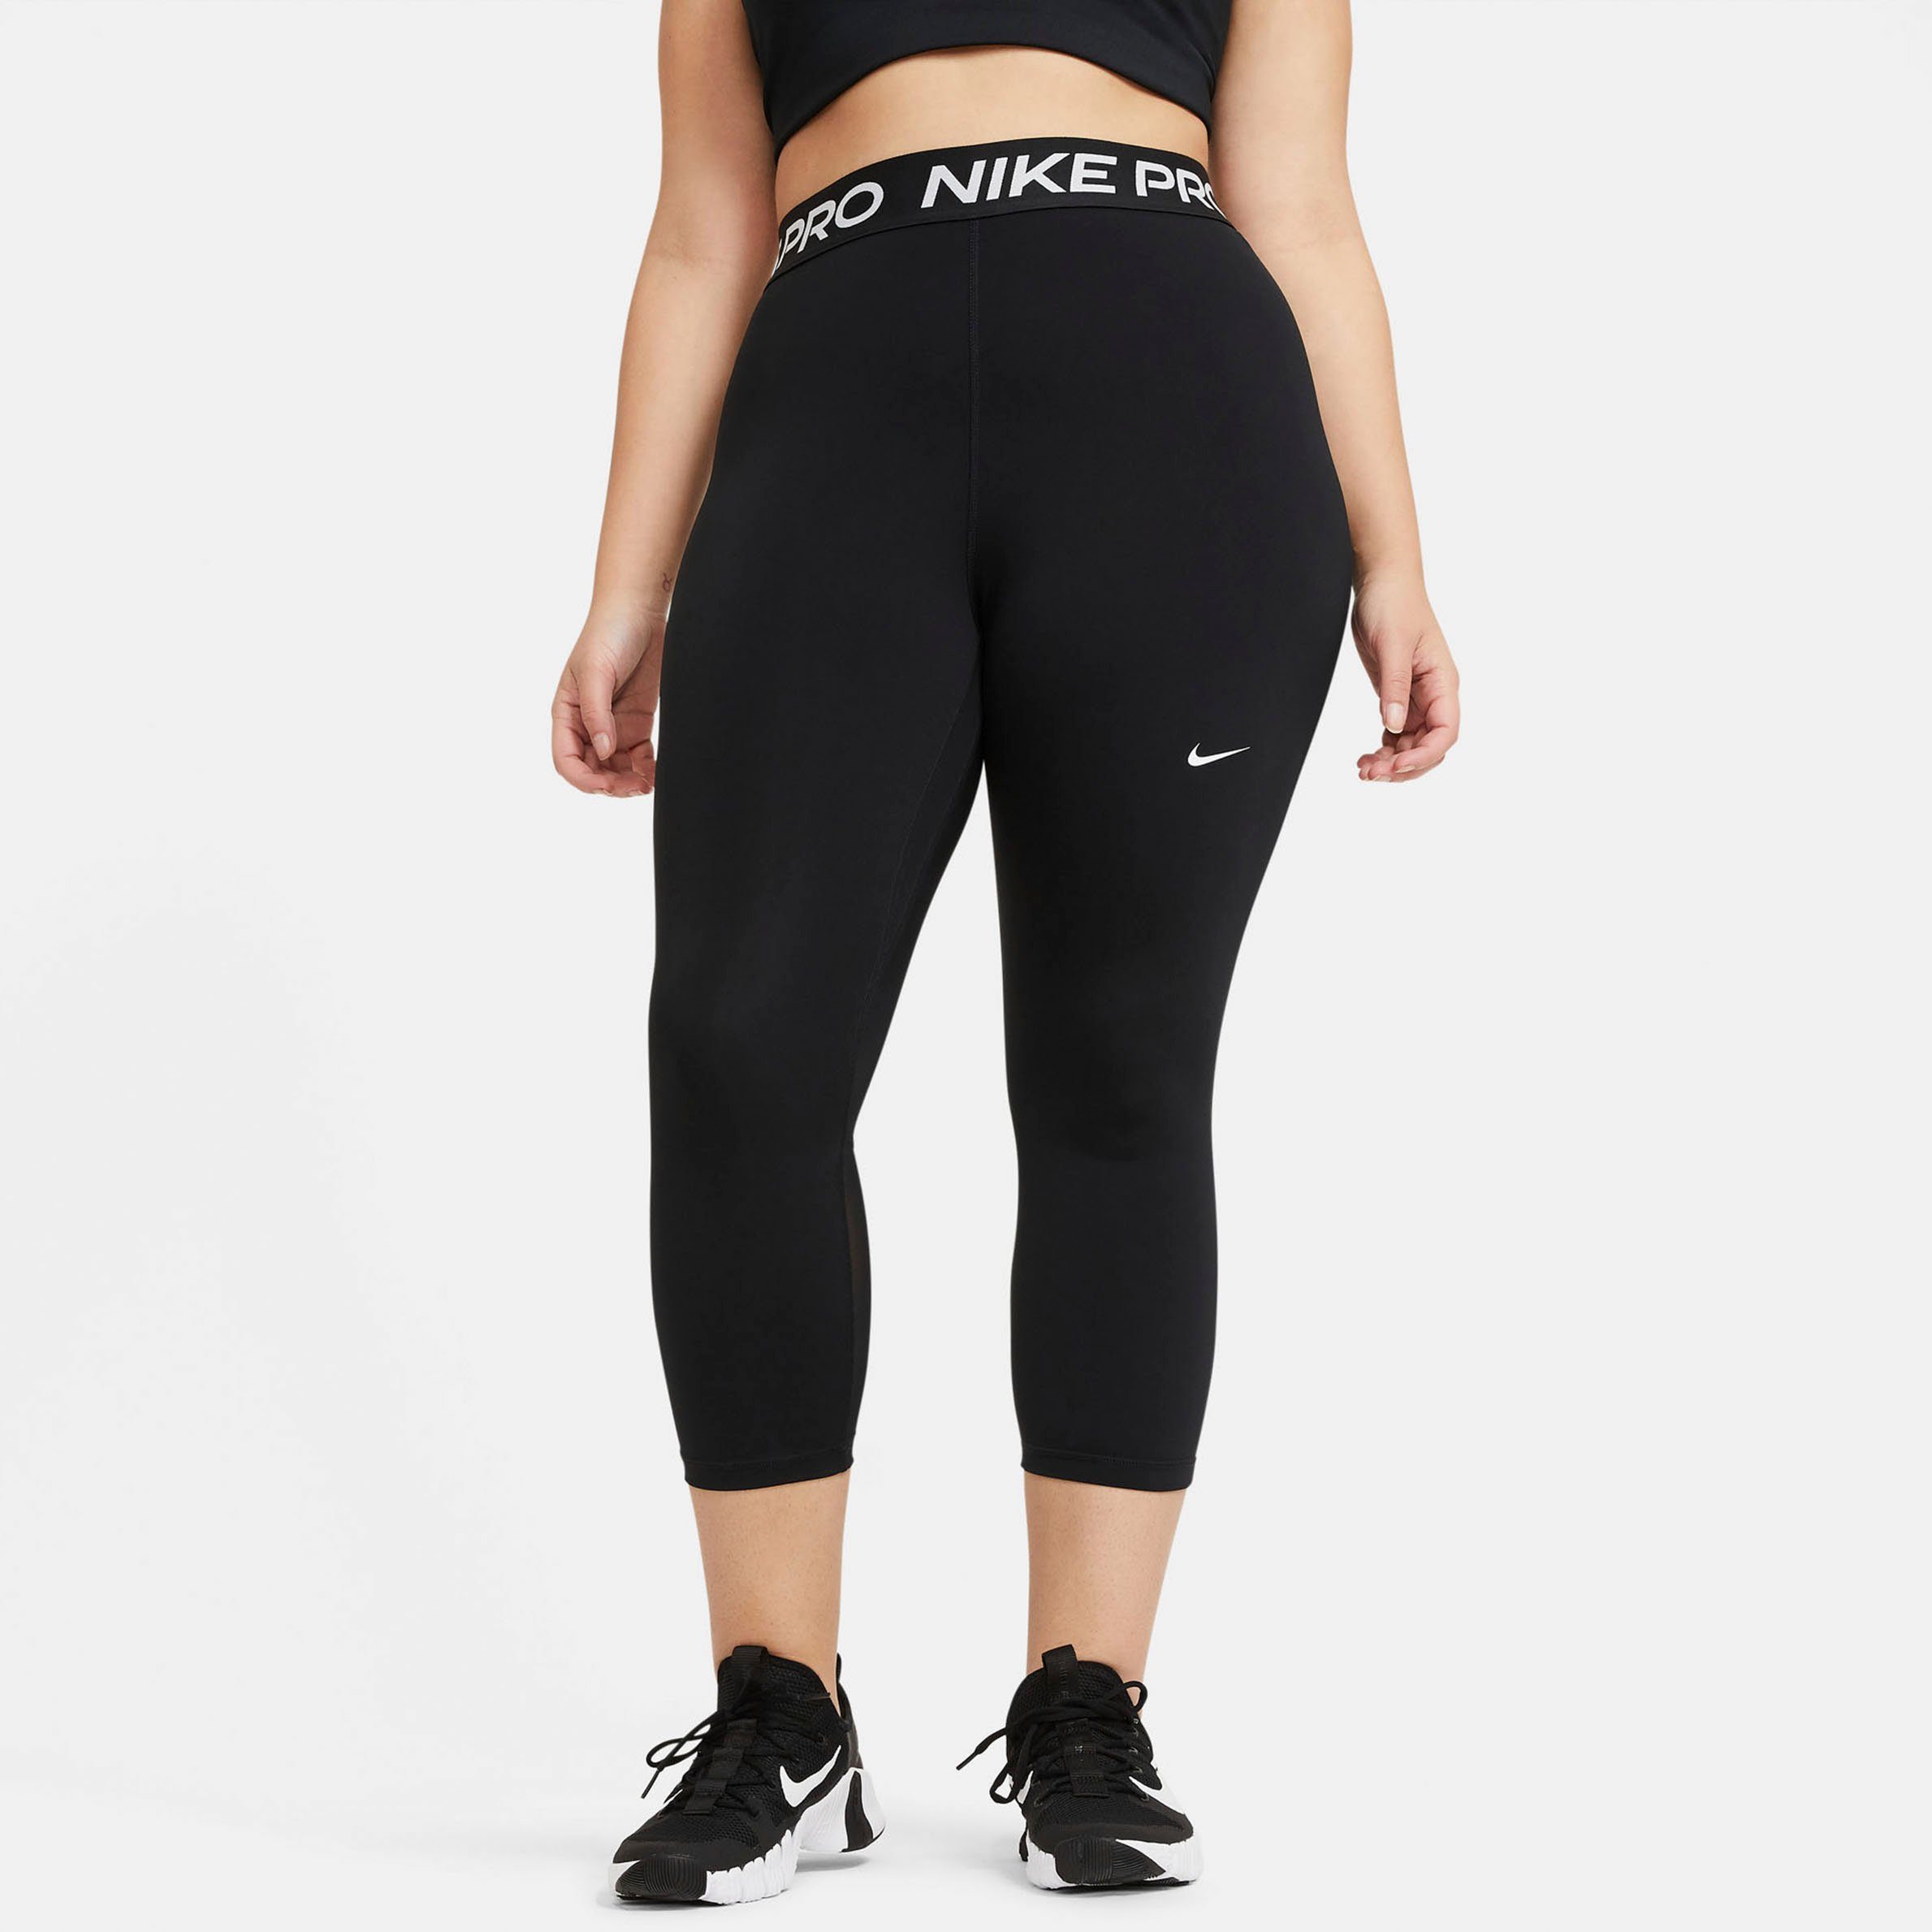 Nike Funktionstights Tights Size Cropped Nike 365 Pro Women's Plus